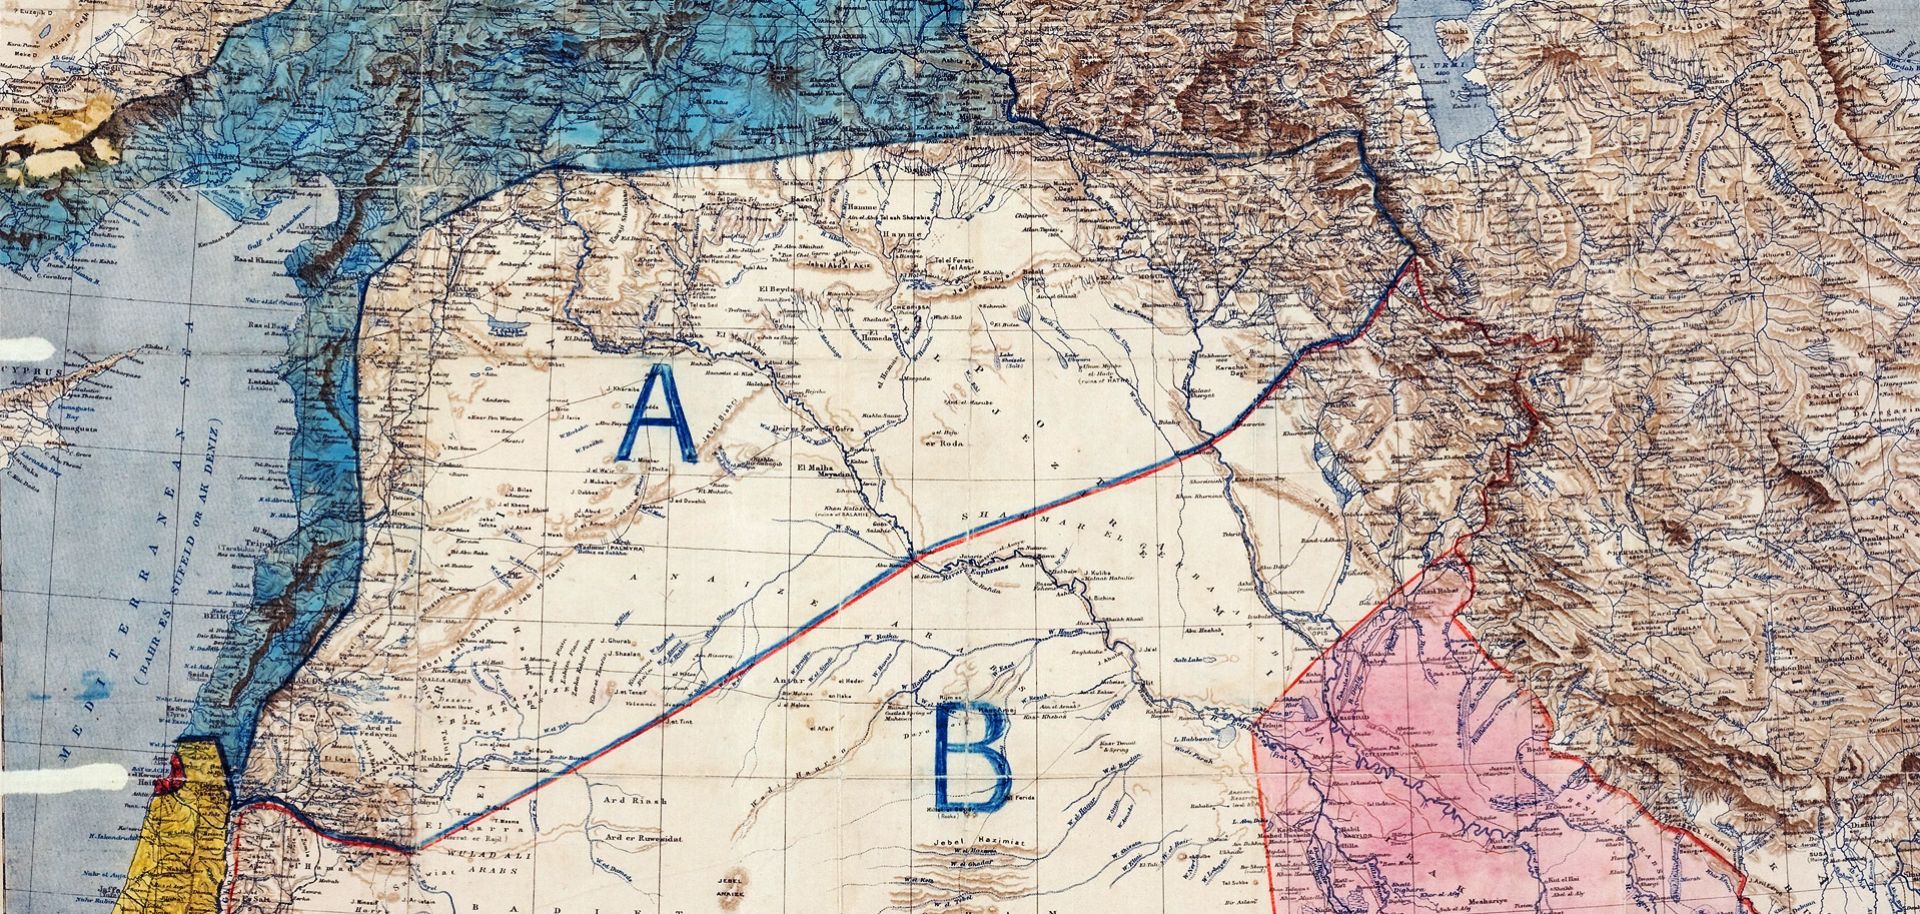 The 1916 Sykes-Picot agreement laid the framework for many of the boundaries that still define the Middle East today, delineating Jordan, Lebanon, Syria, Iraq, Mandate Palestine and several Arabian Gulf countries. The boundaries are losing significance, but there is little impetus to redraw them.